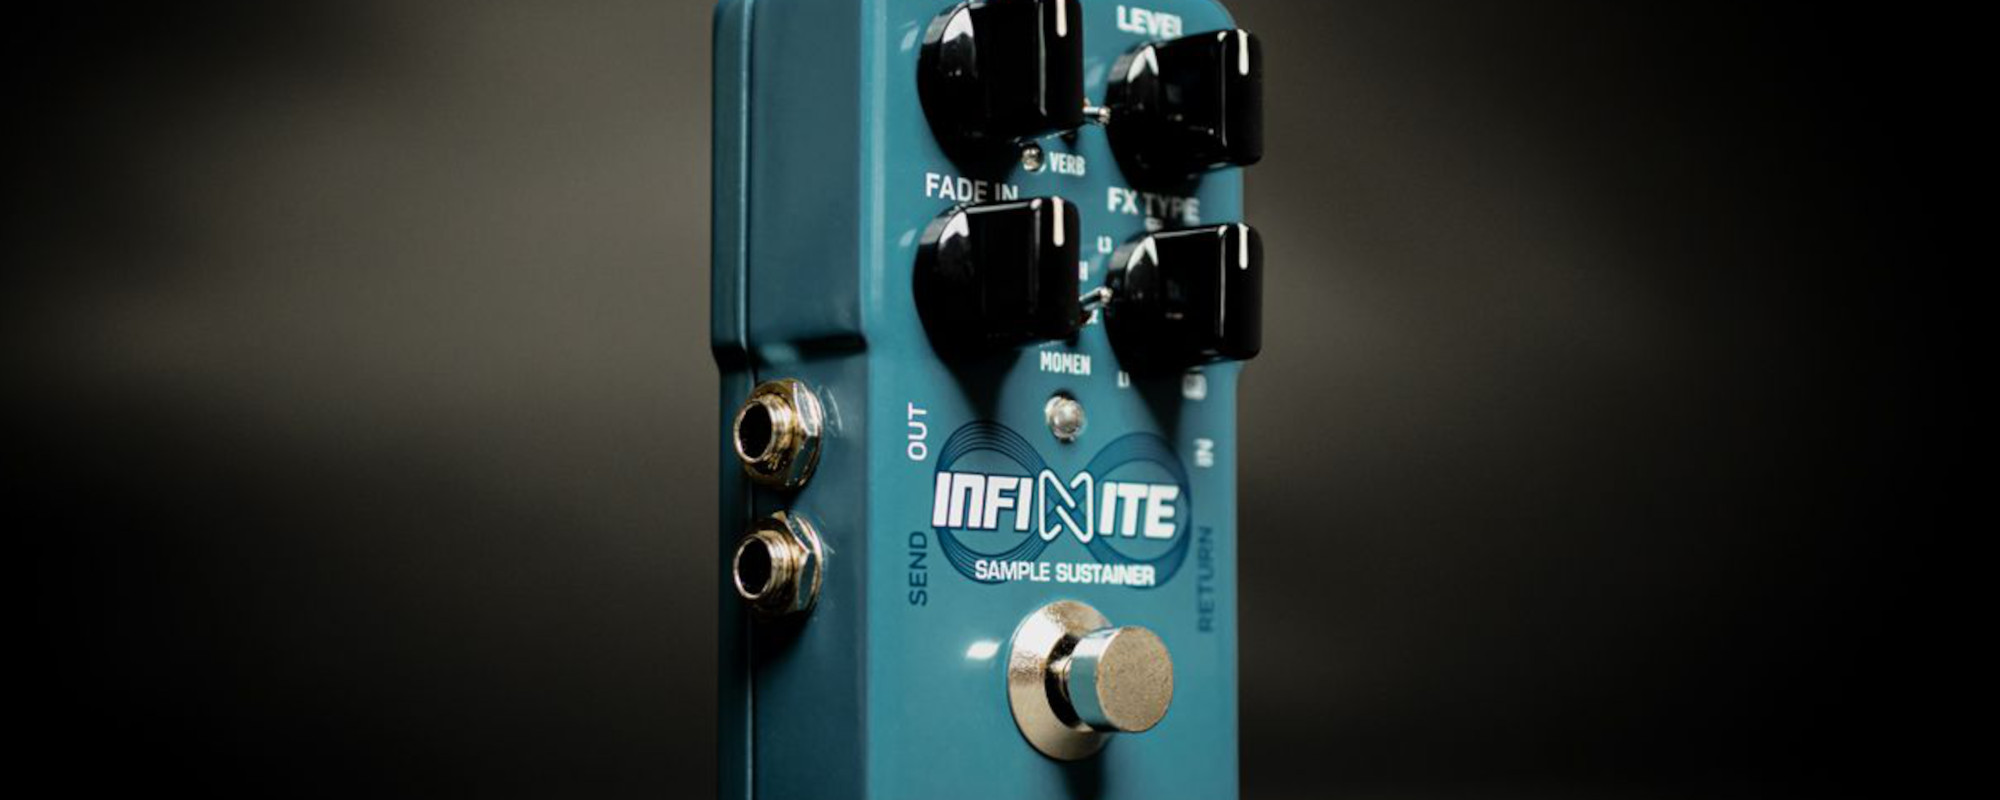 Gear Review: TC Electronic Infinite Sample Sustainer - American